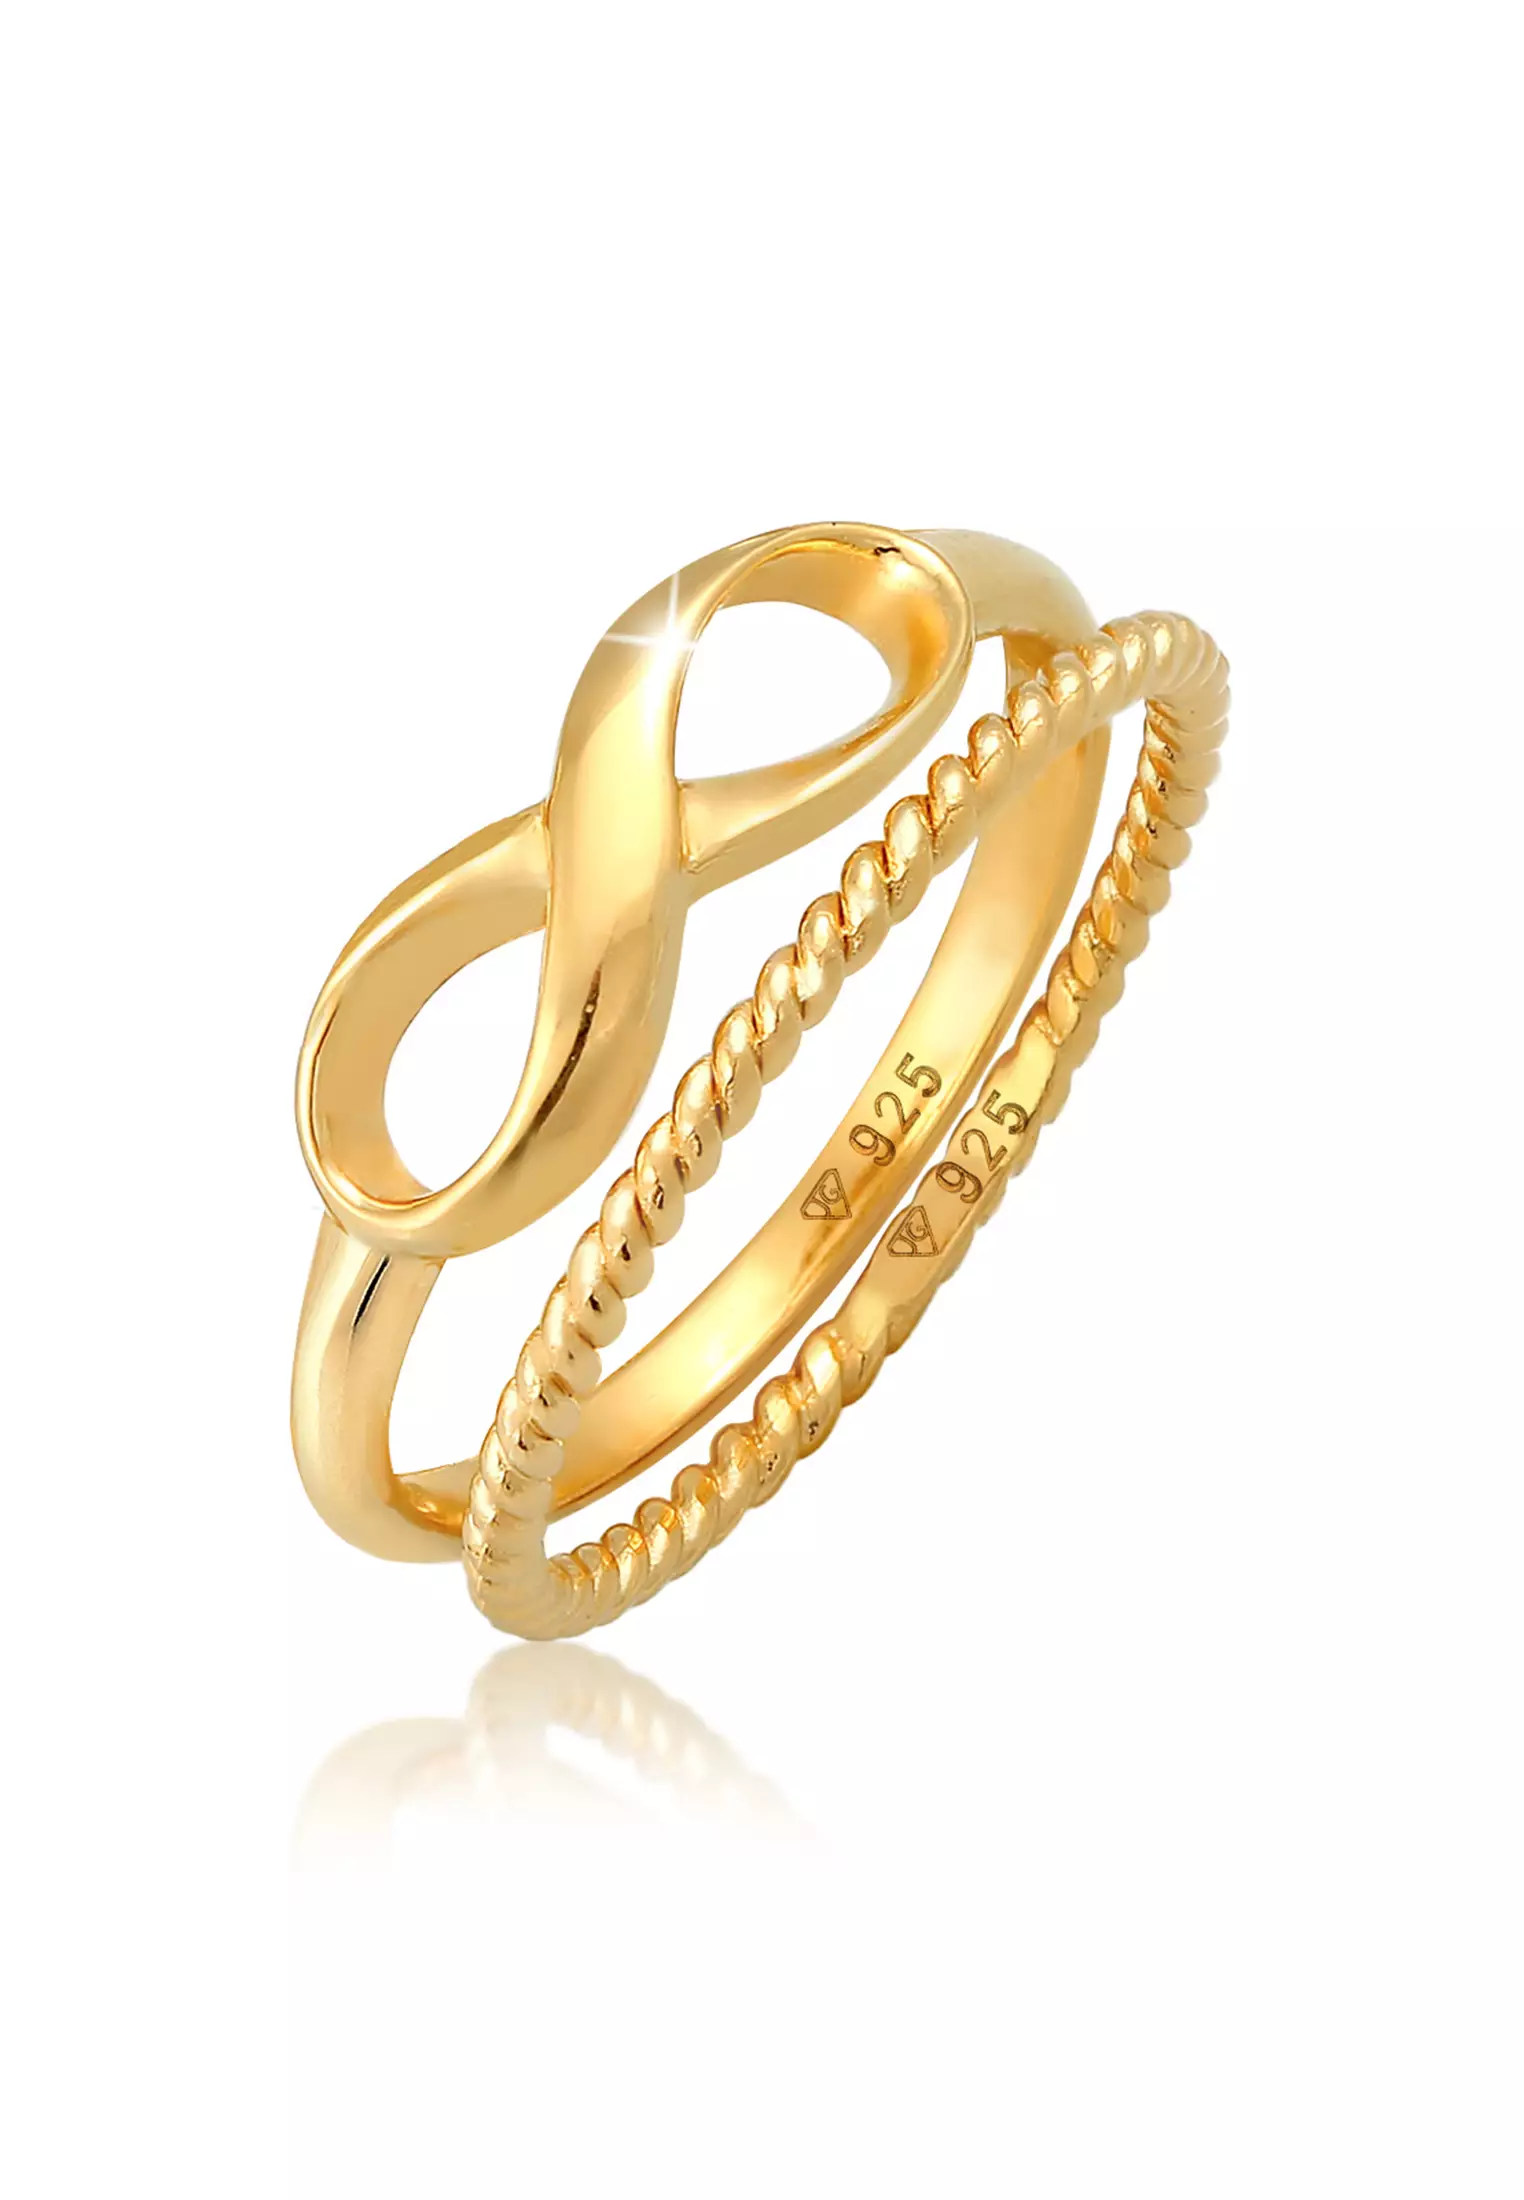 Buy ELLI GERMANY Ring Stacking Ring Duo Infinity Twisted Basic Trend ...